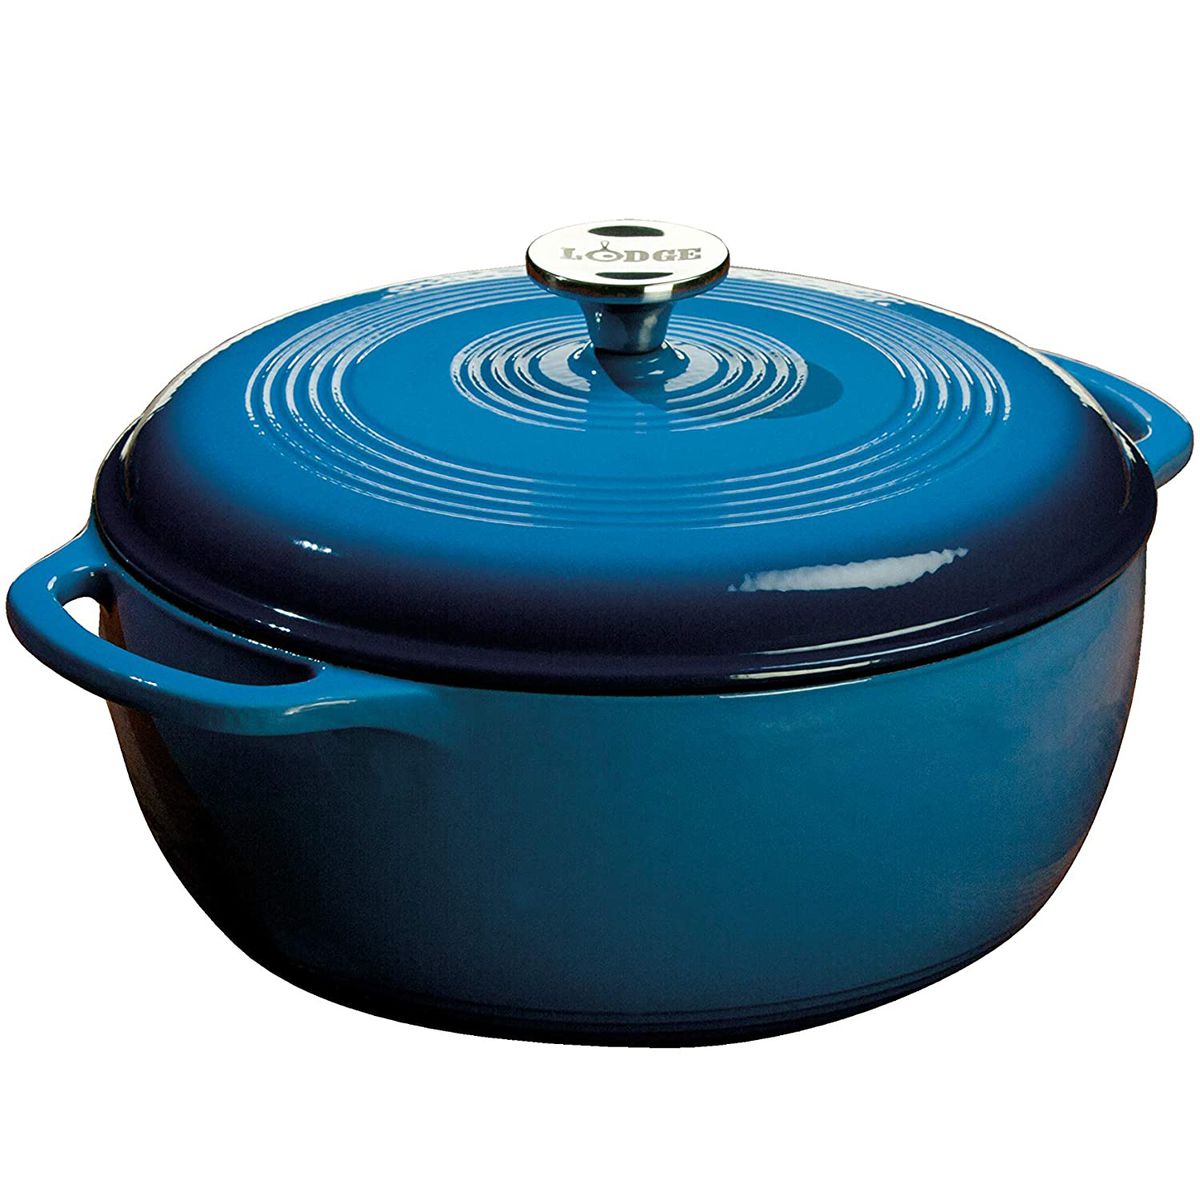 Lodge Dutch Oven Review